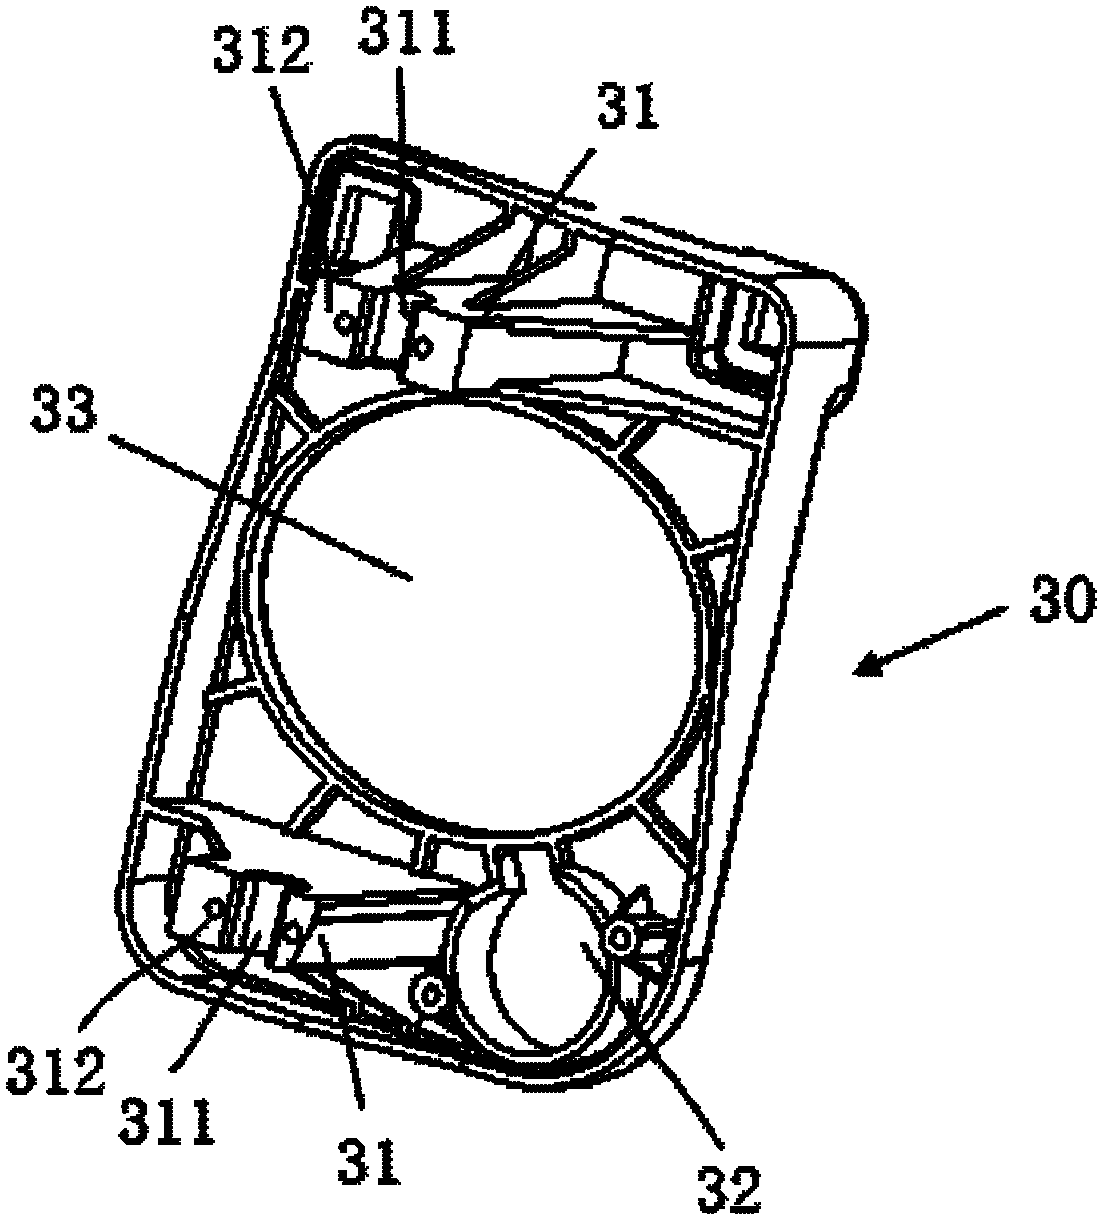 Adaptive front lighting system (AFS) horizontal angle adjustment actuating mechanism